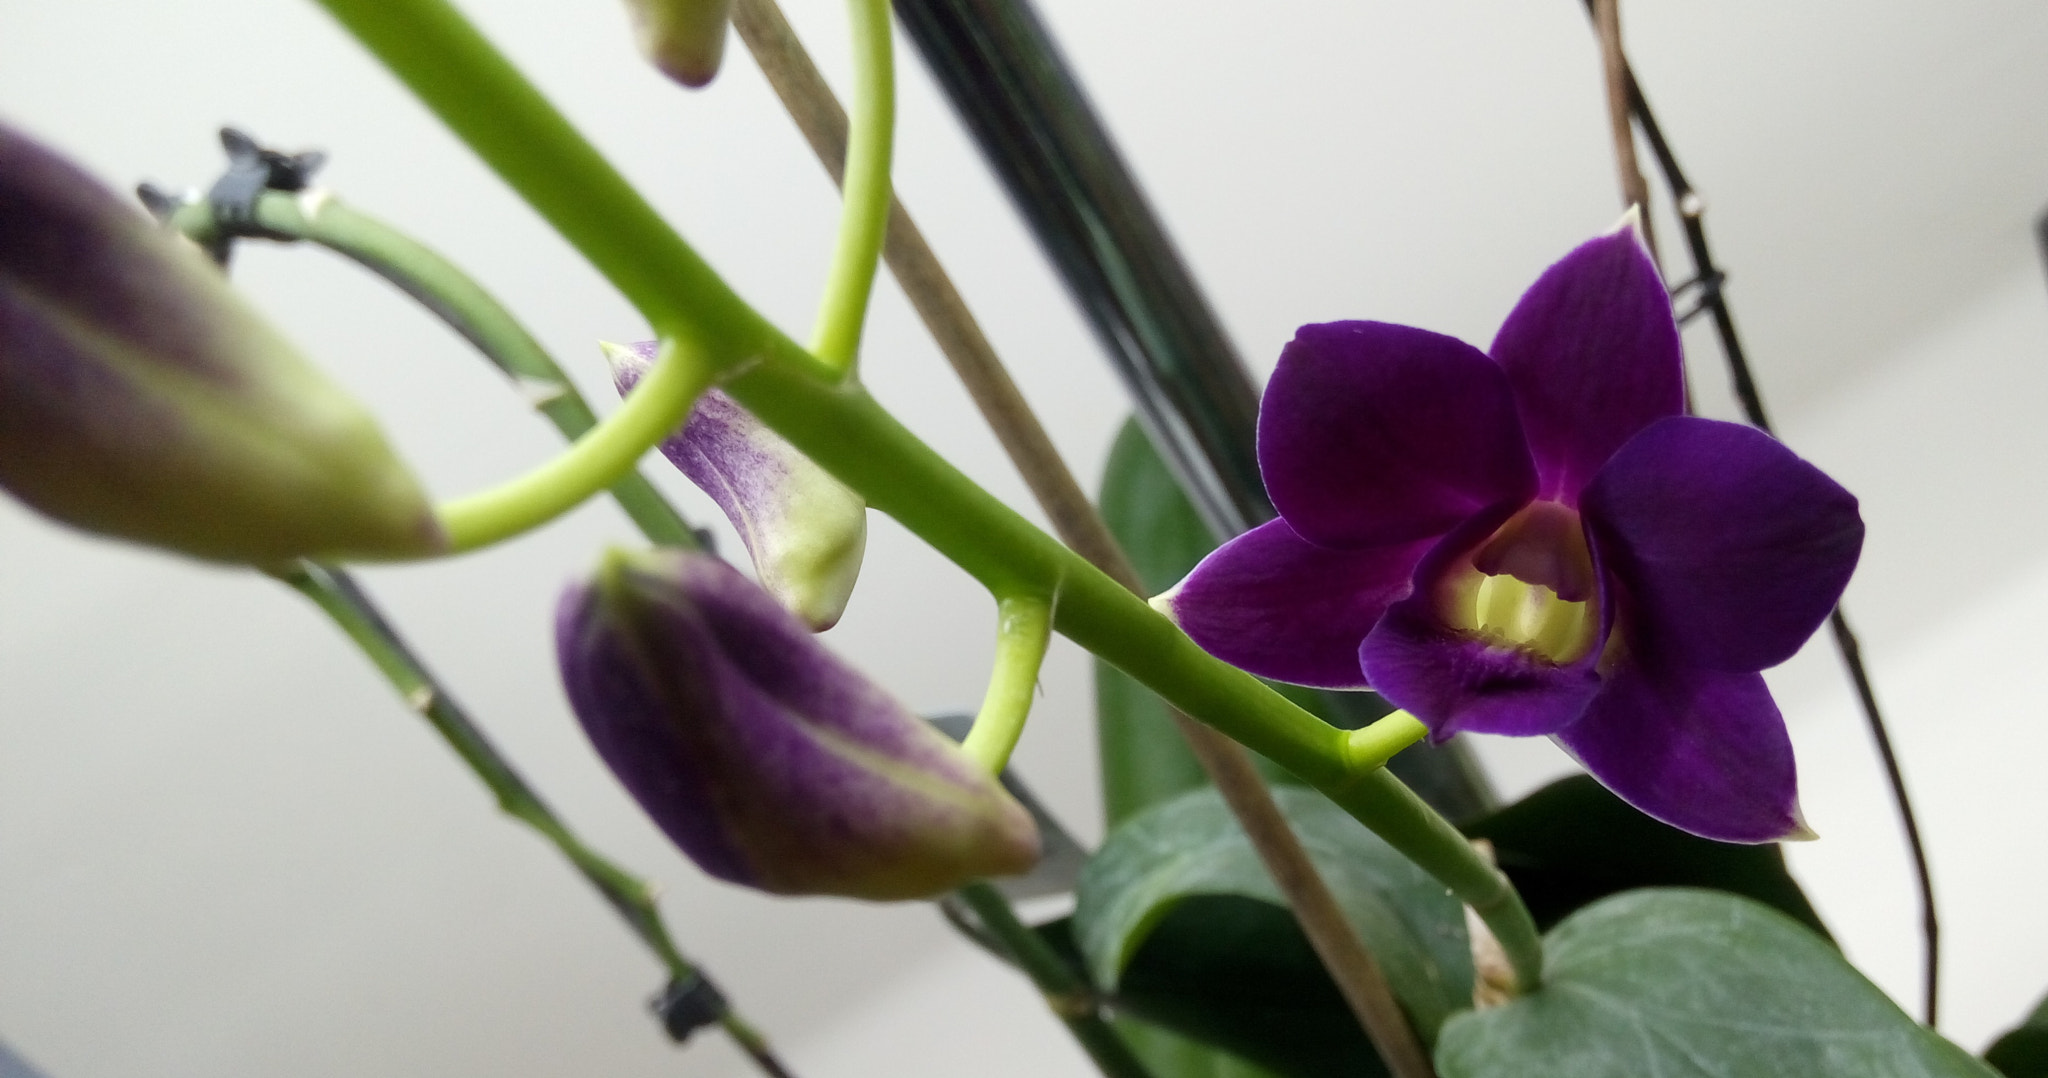 HTC DESIRE 728G DUAL SIM sample photo. Another one dendrobium photography